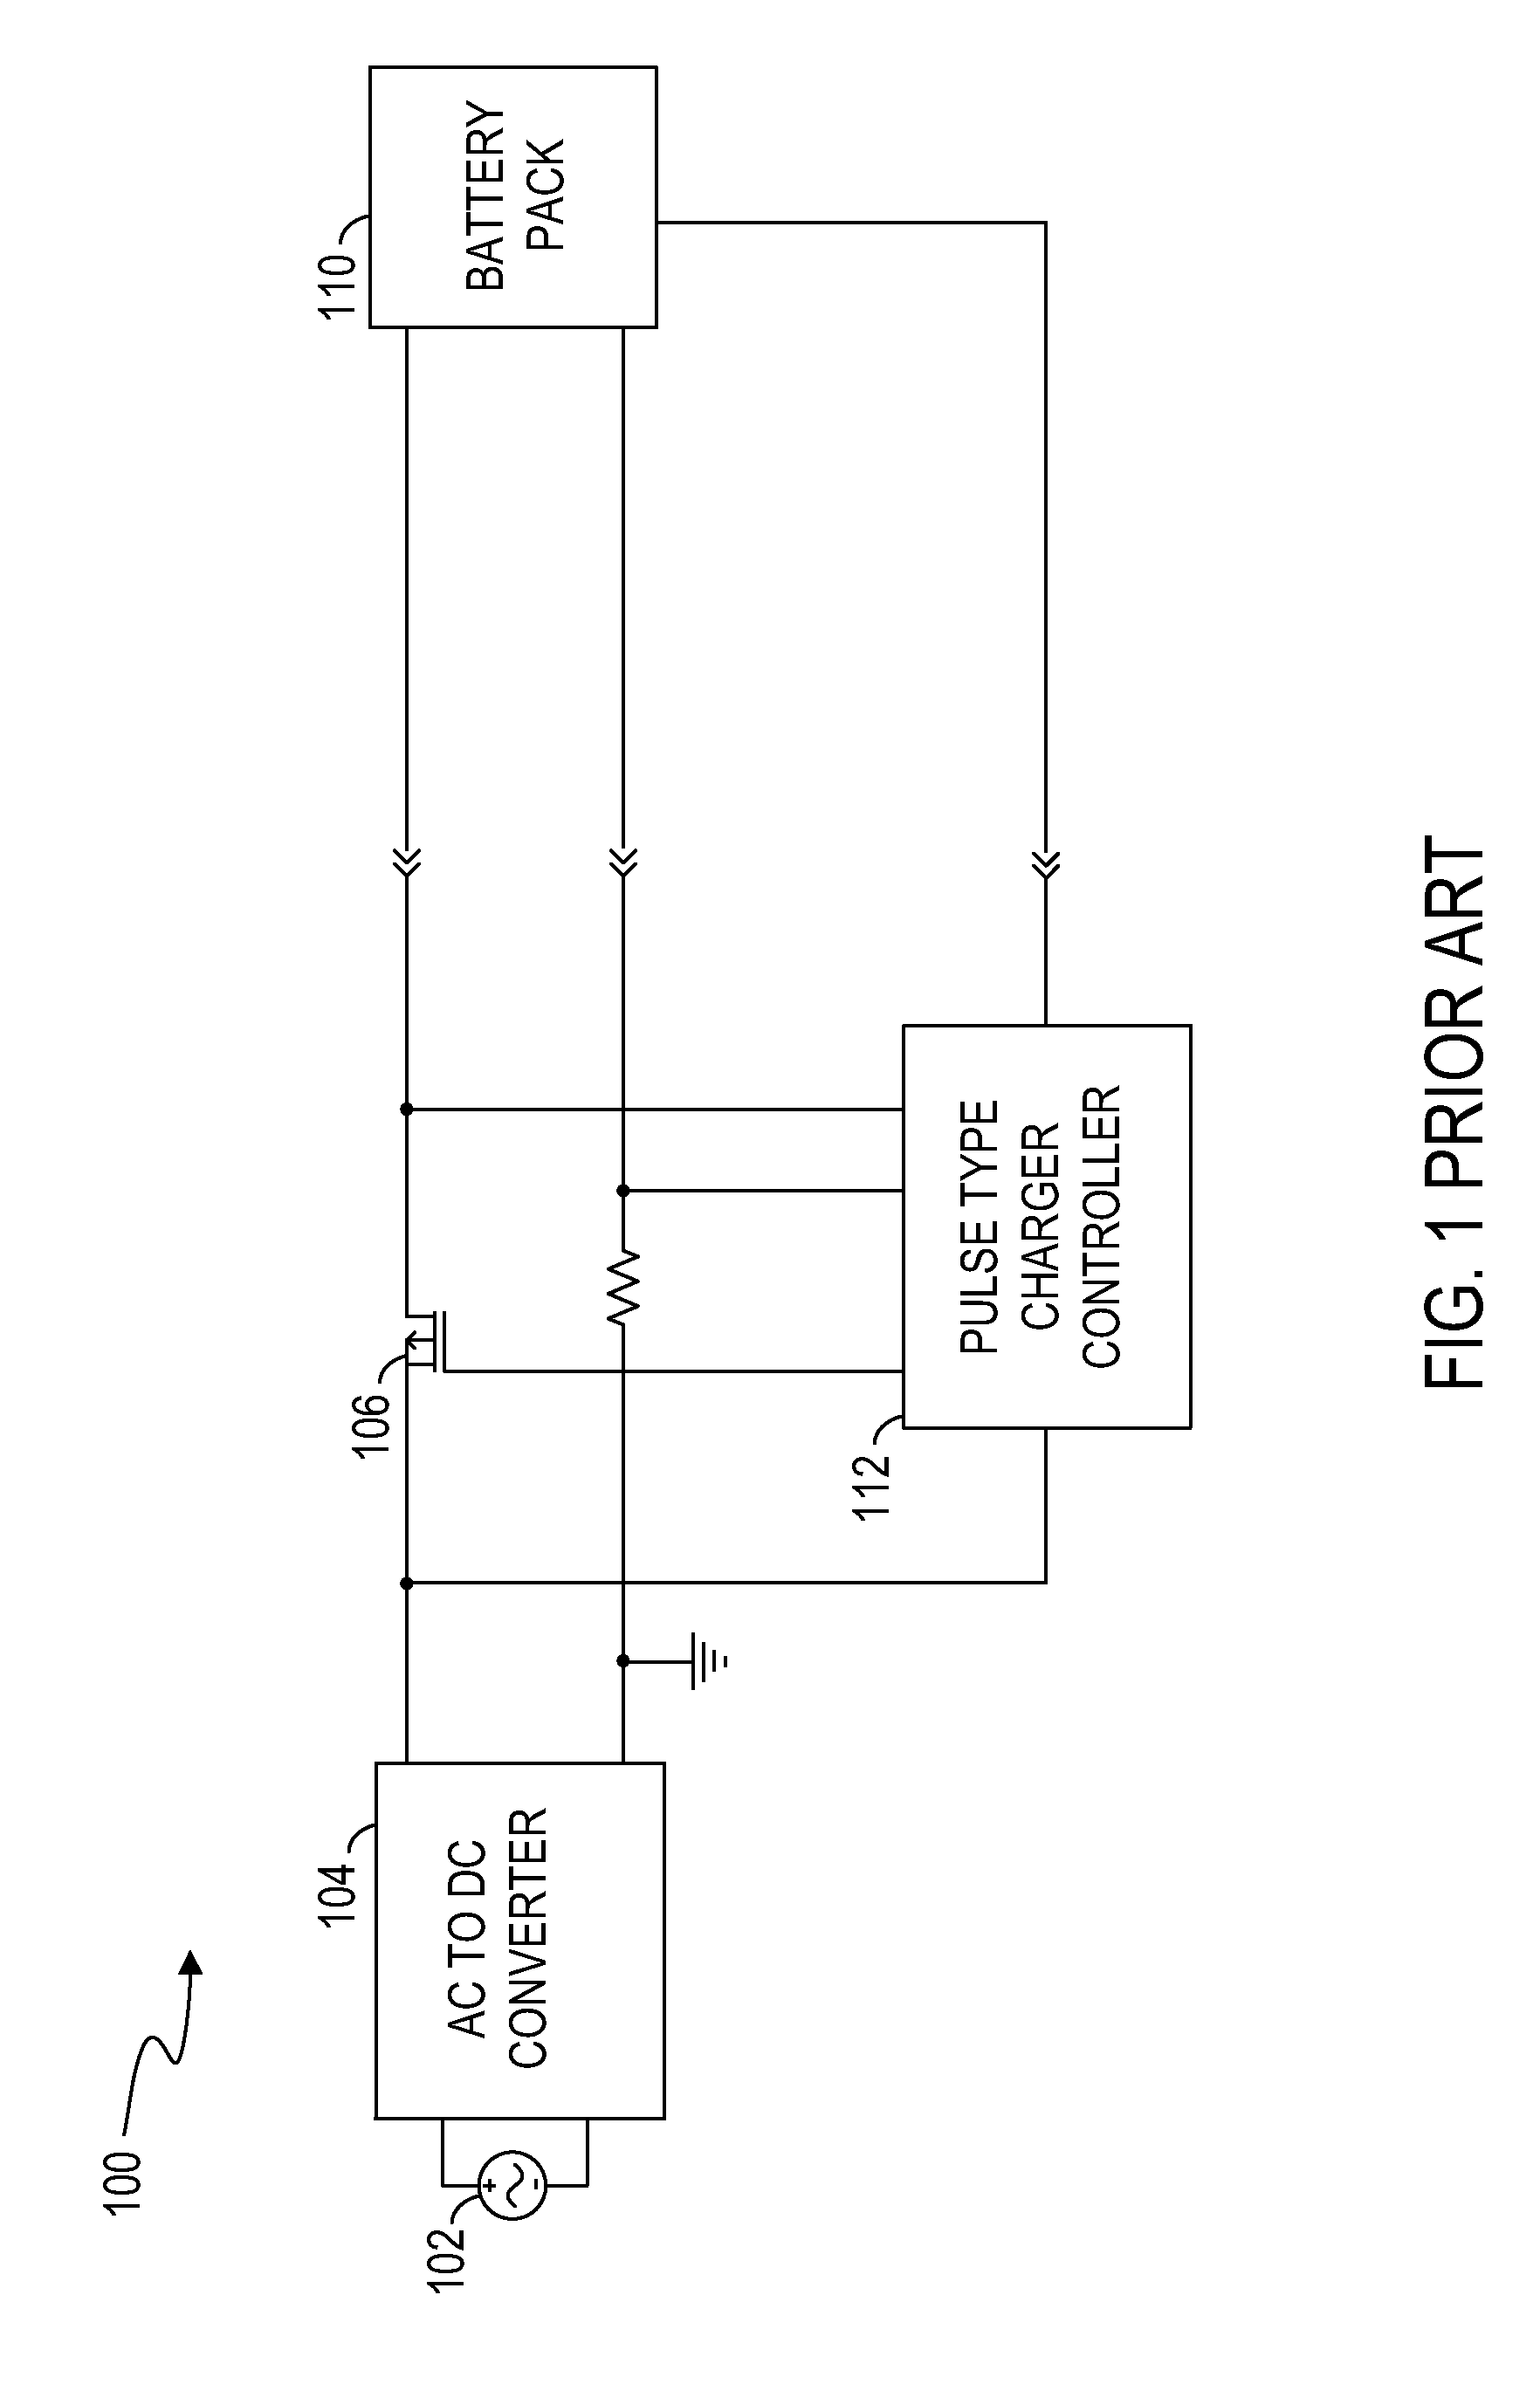 Circuits and methods for battery charging